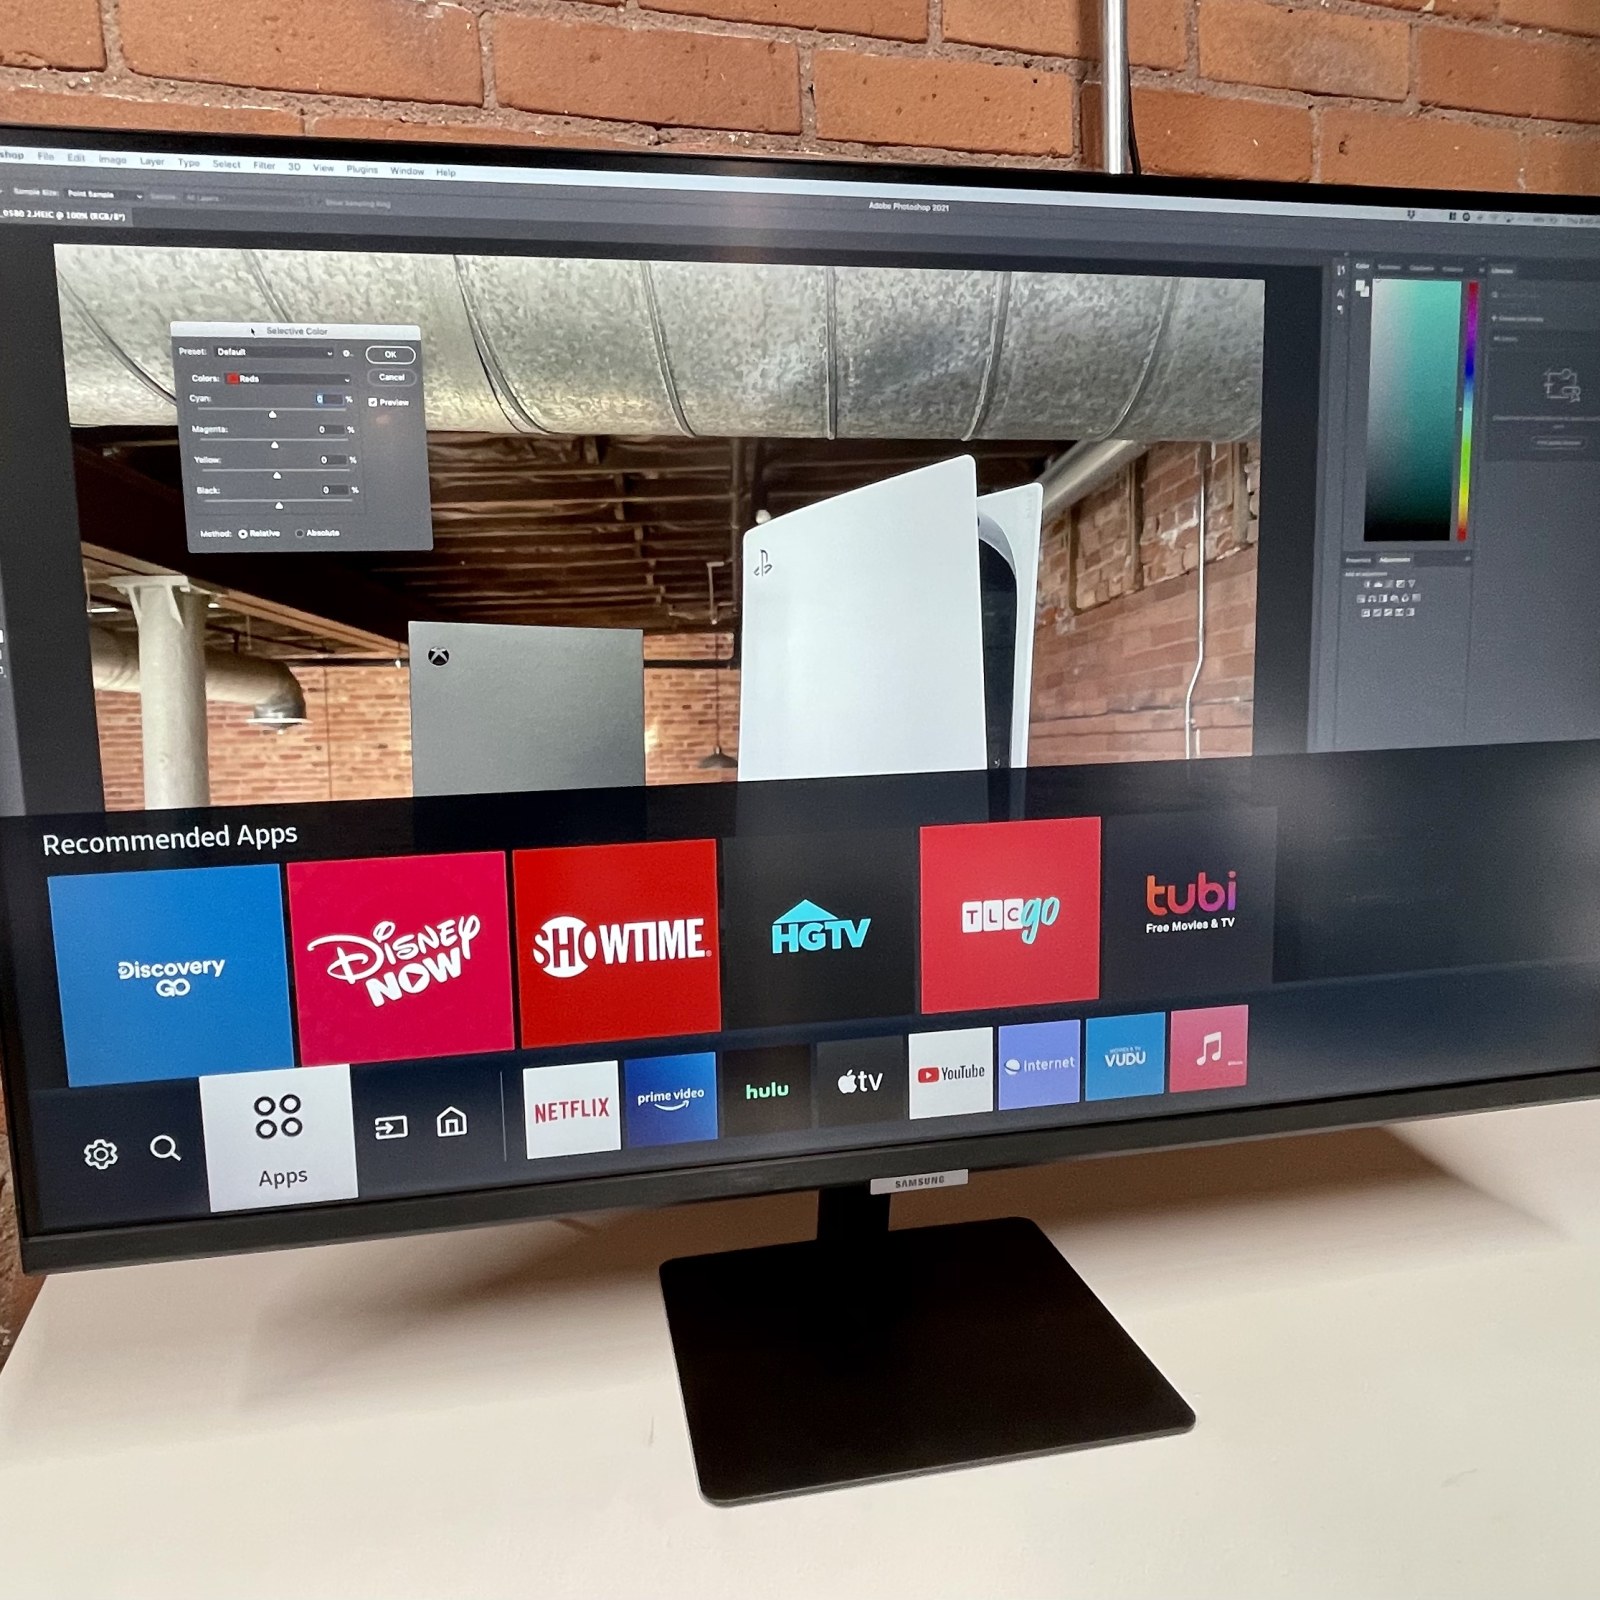 Samsung Smart Monitor M7 Review The Perfect Display For Work And Play